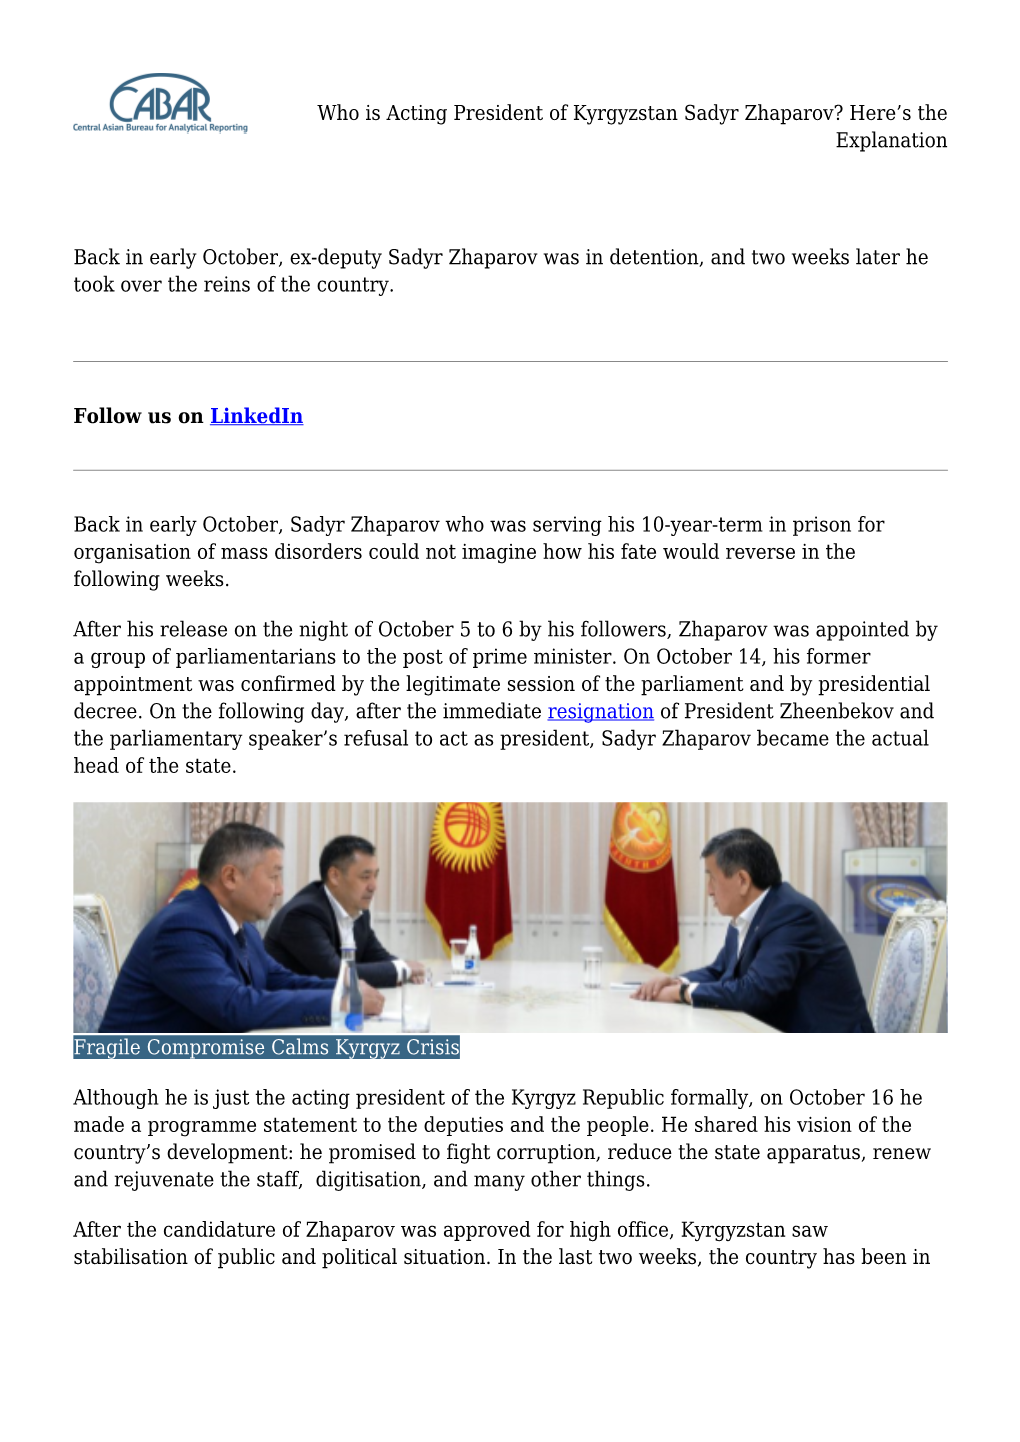 Who Is Acting President of Kyrgyzstan Sadyr Zhaparov? Here’S the Explanation